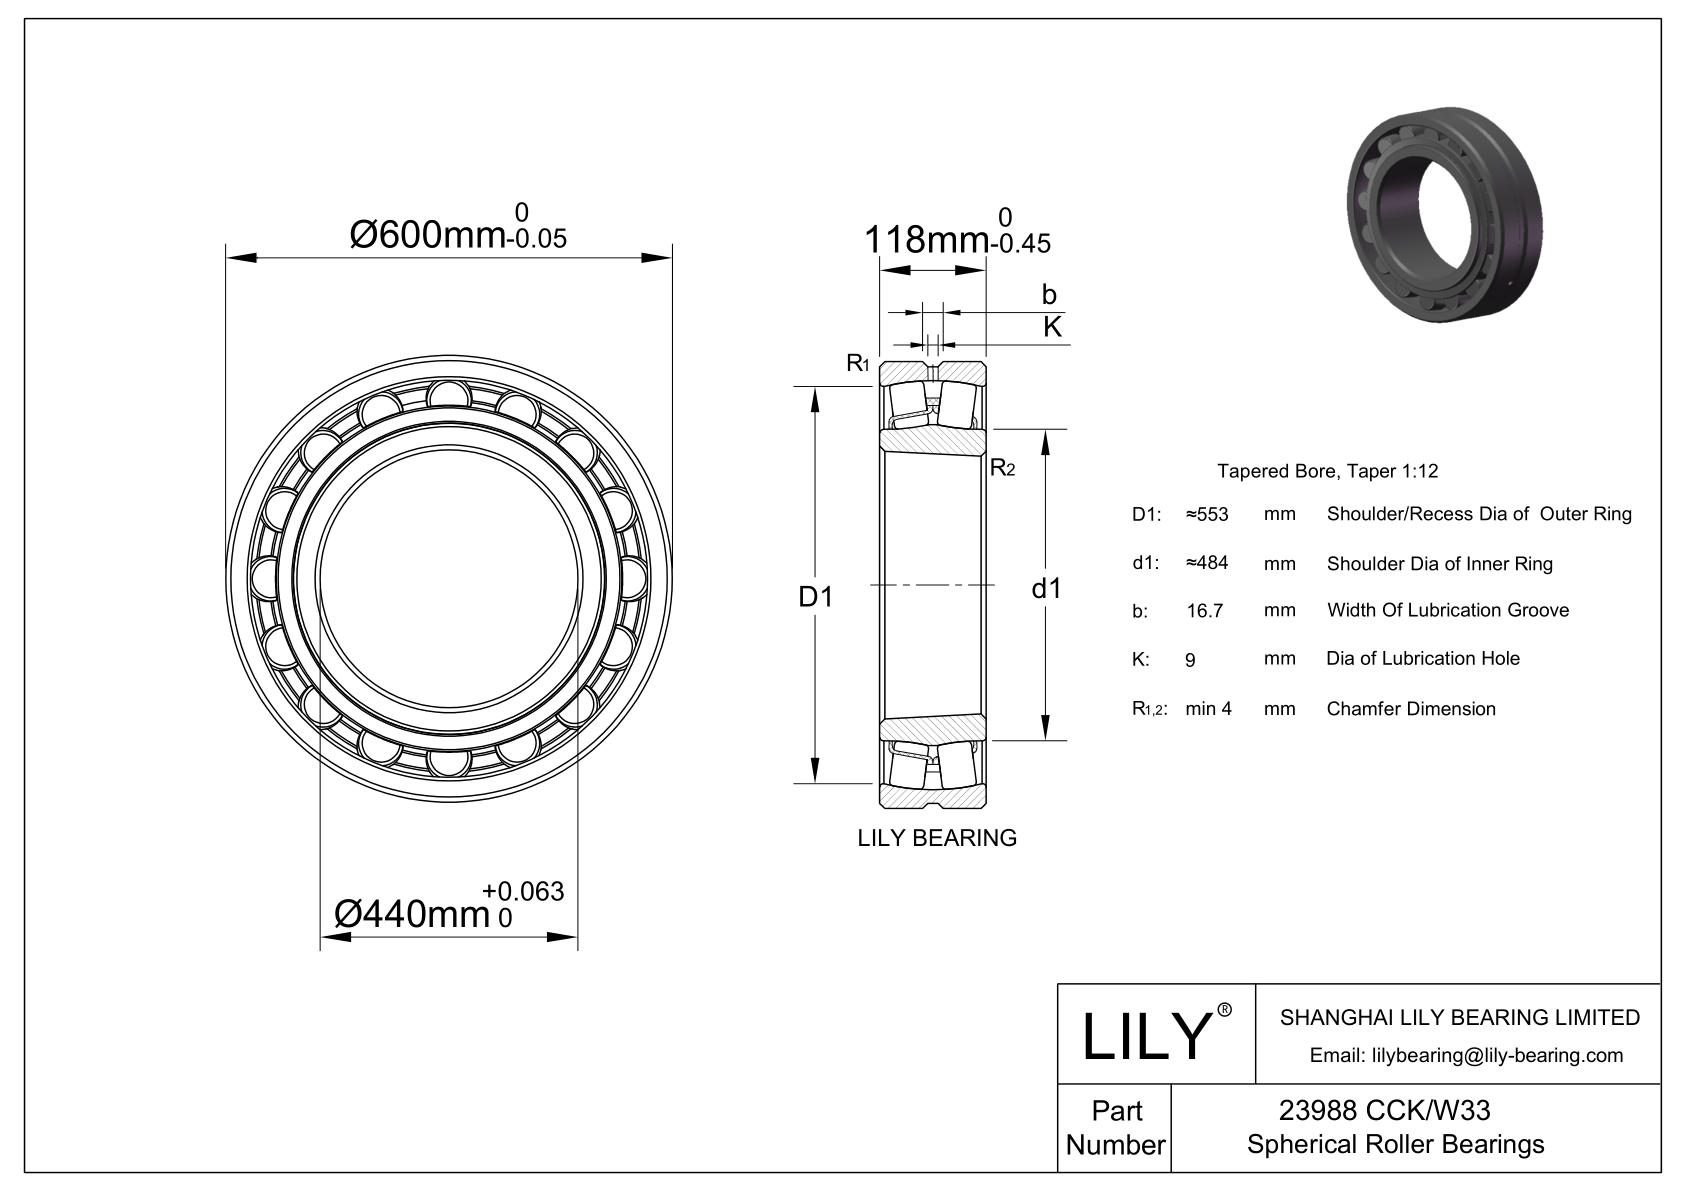 23988 CCK/W33 Double Row Spherical Roller Bearing cad drawing